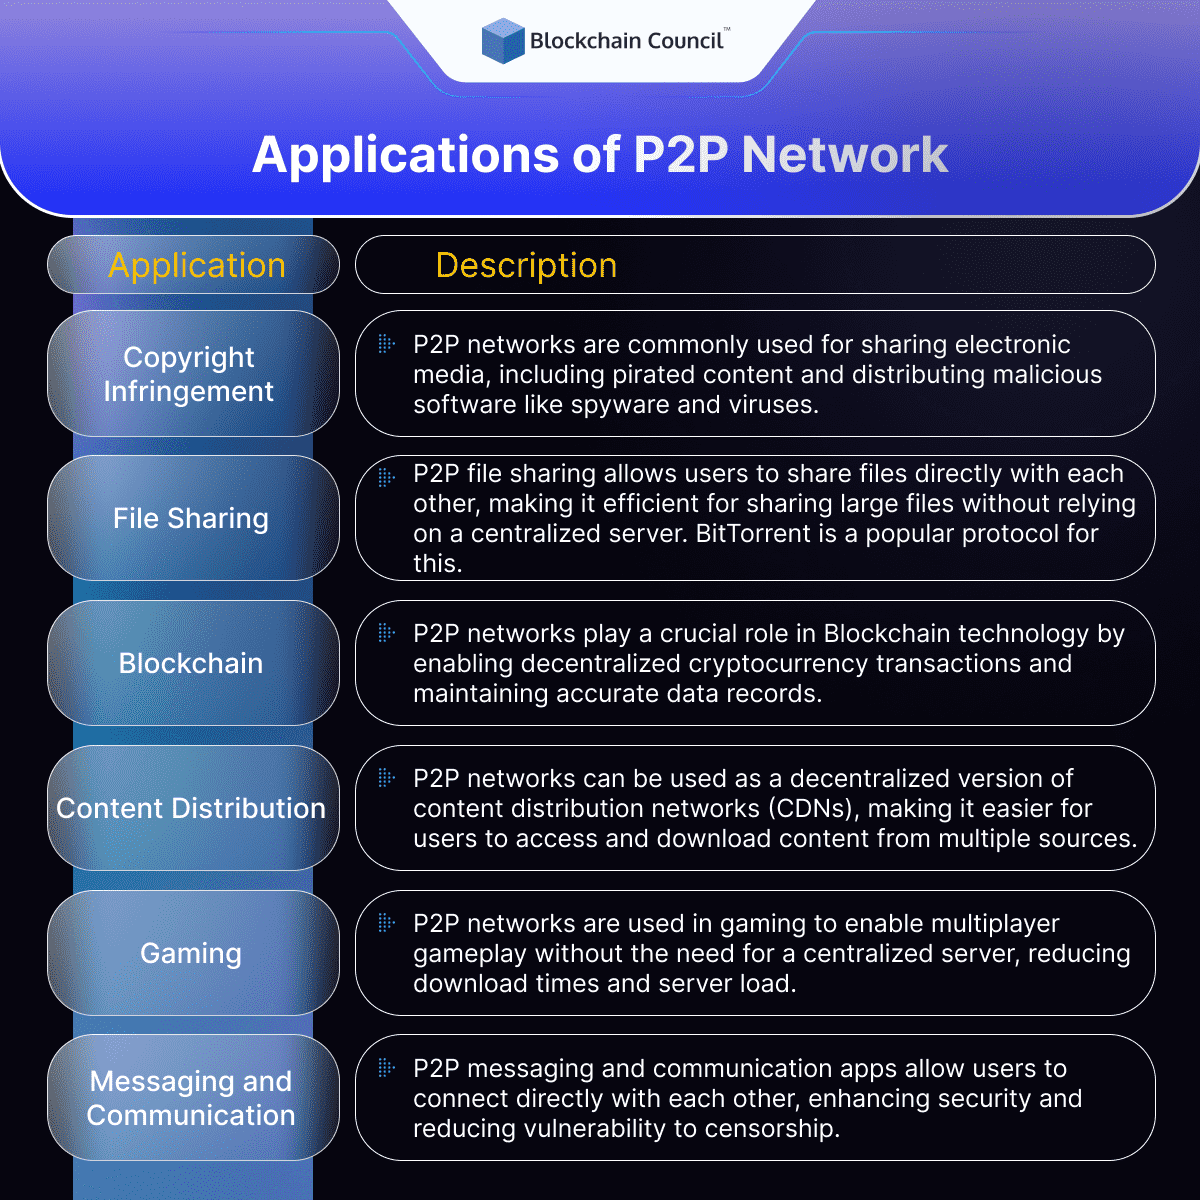 Applications of P2P Network